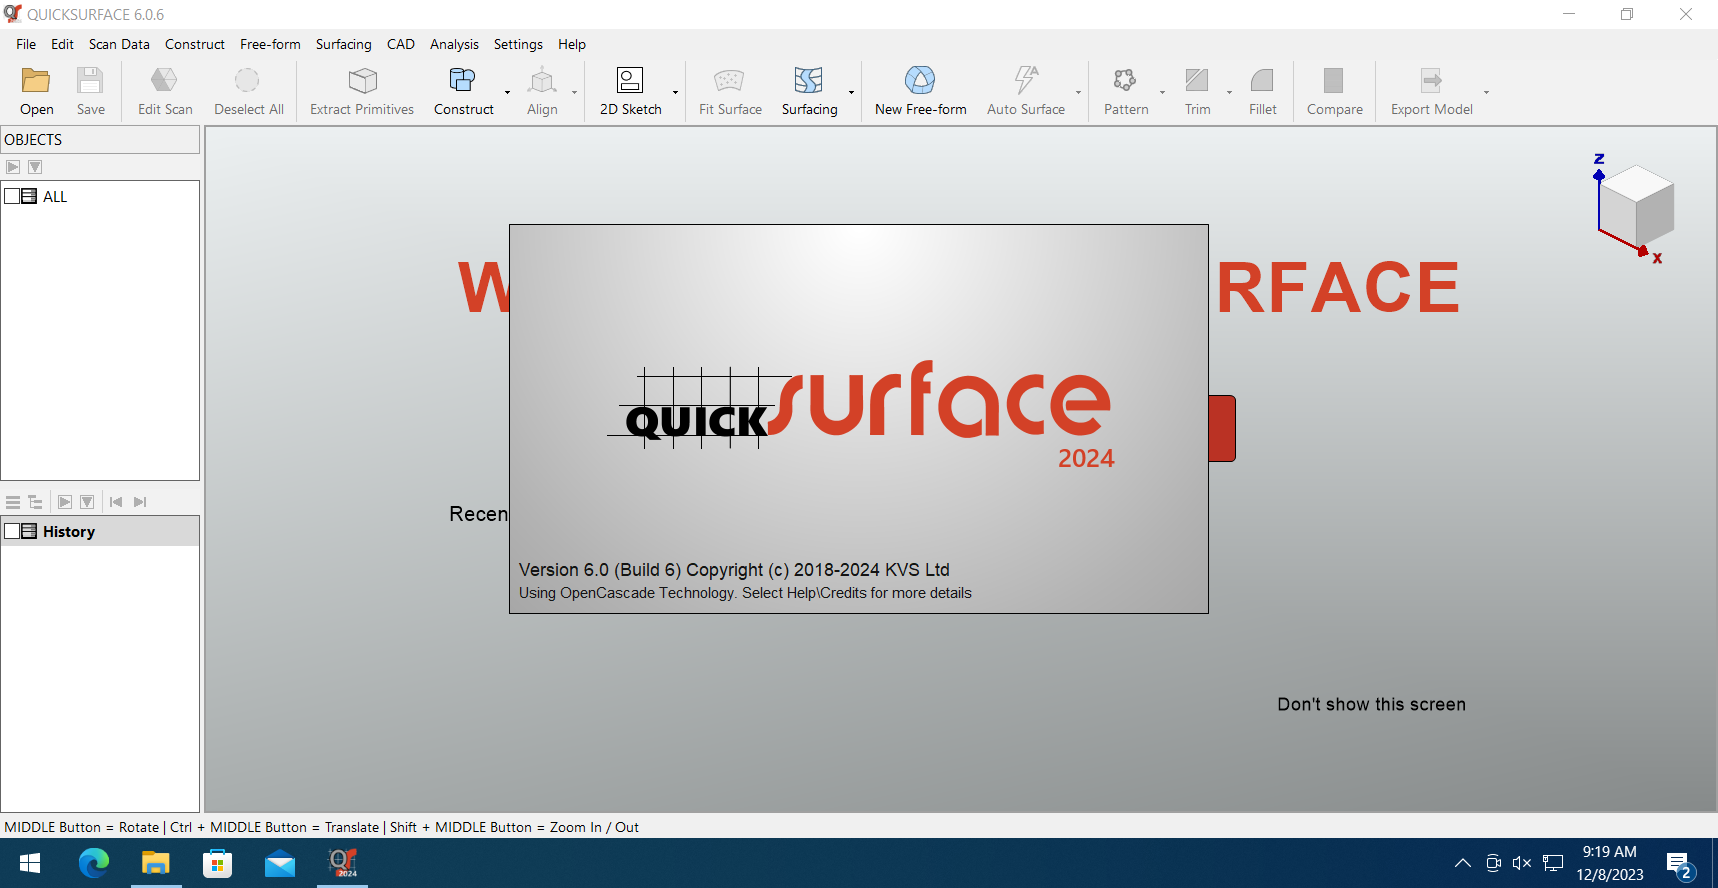 Working with QuickSurface 2024 v6.0.6 full license